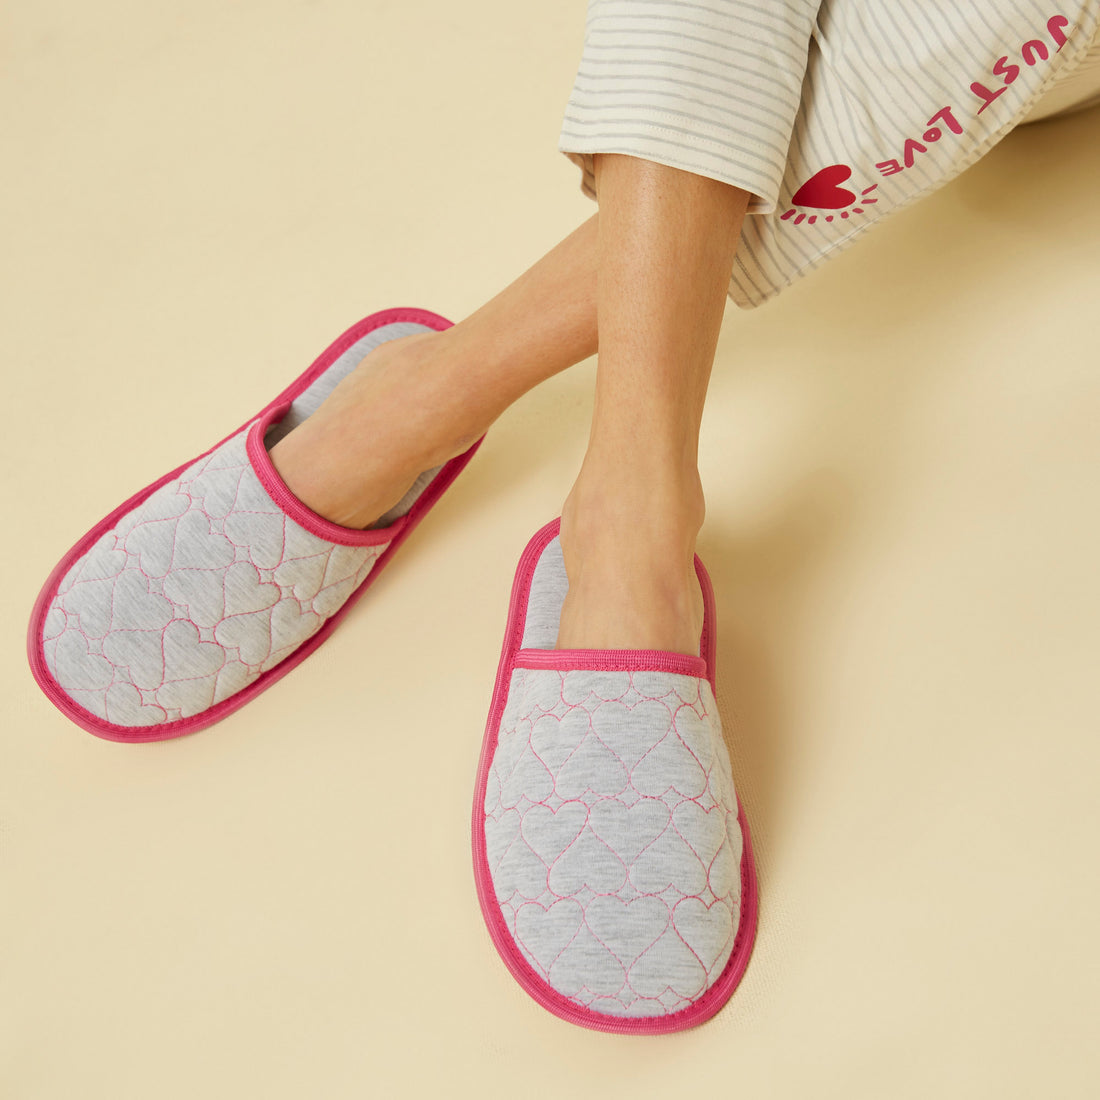 grey-house-slippers_spfd161001_gray_01